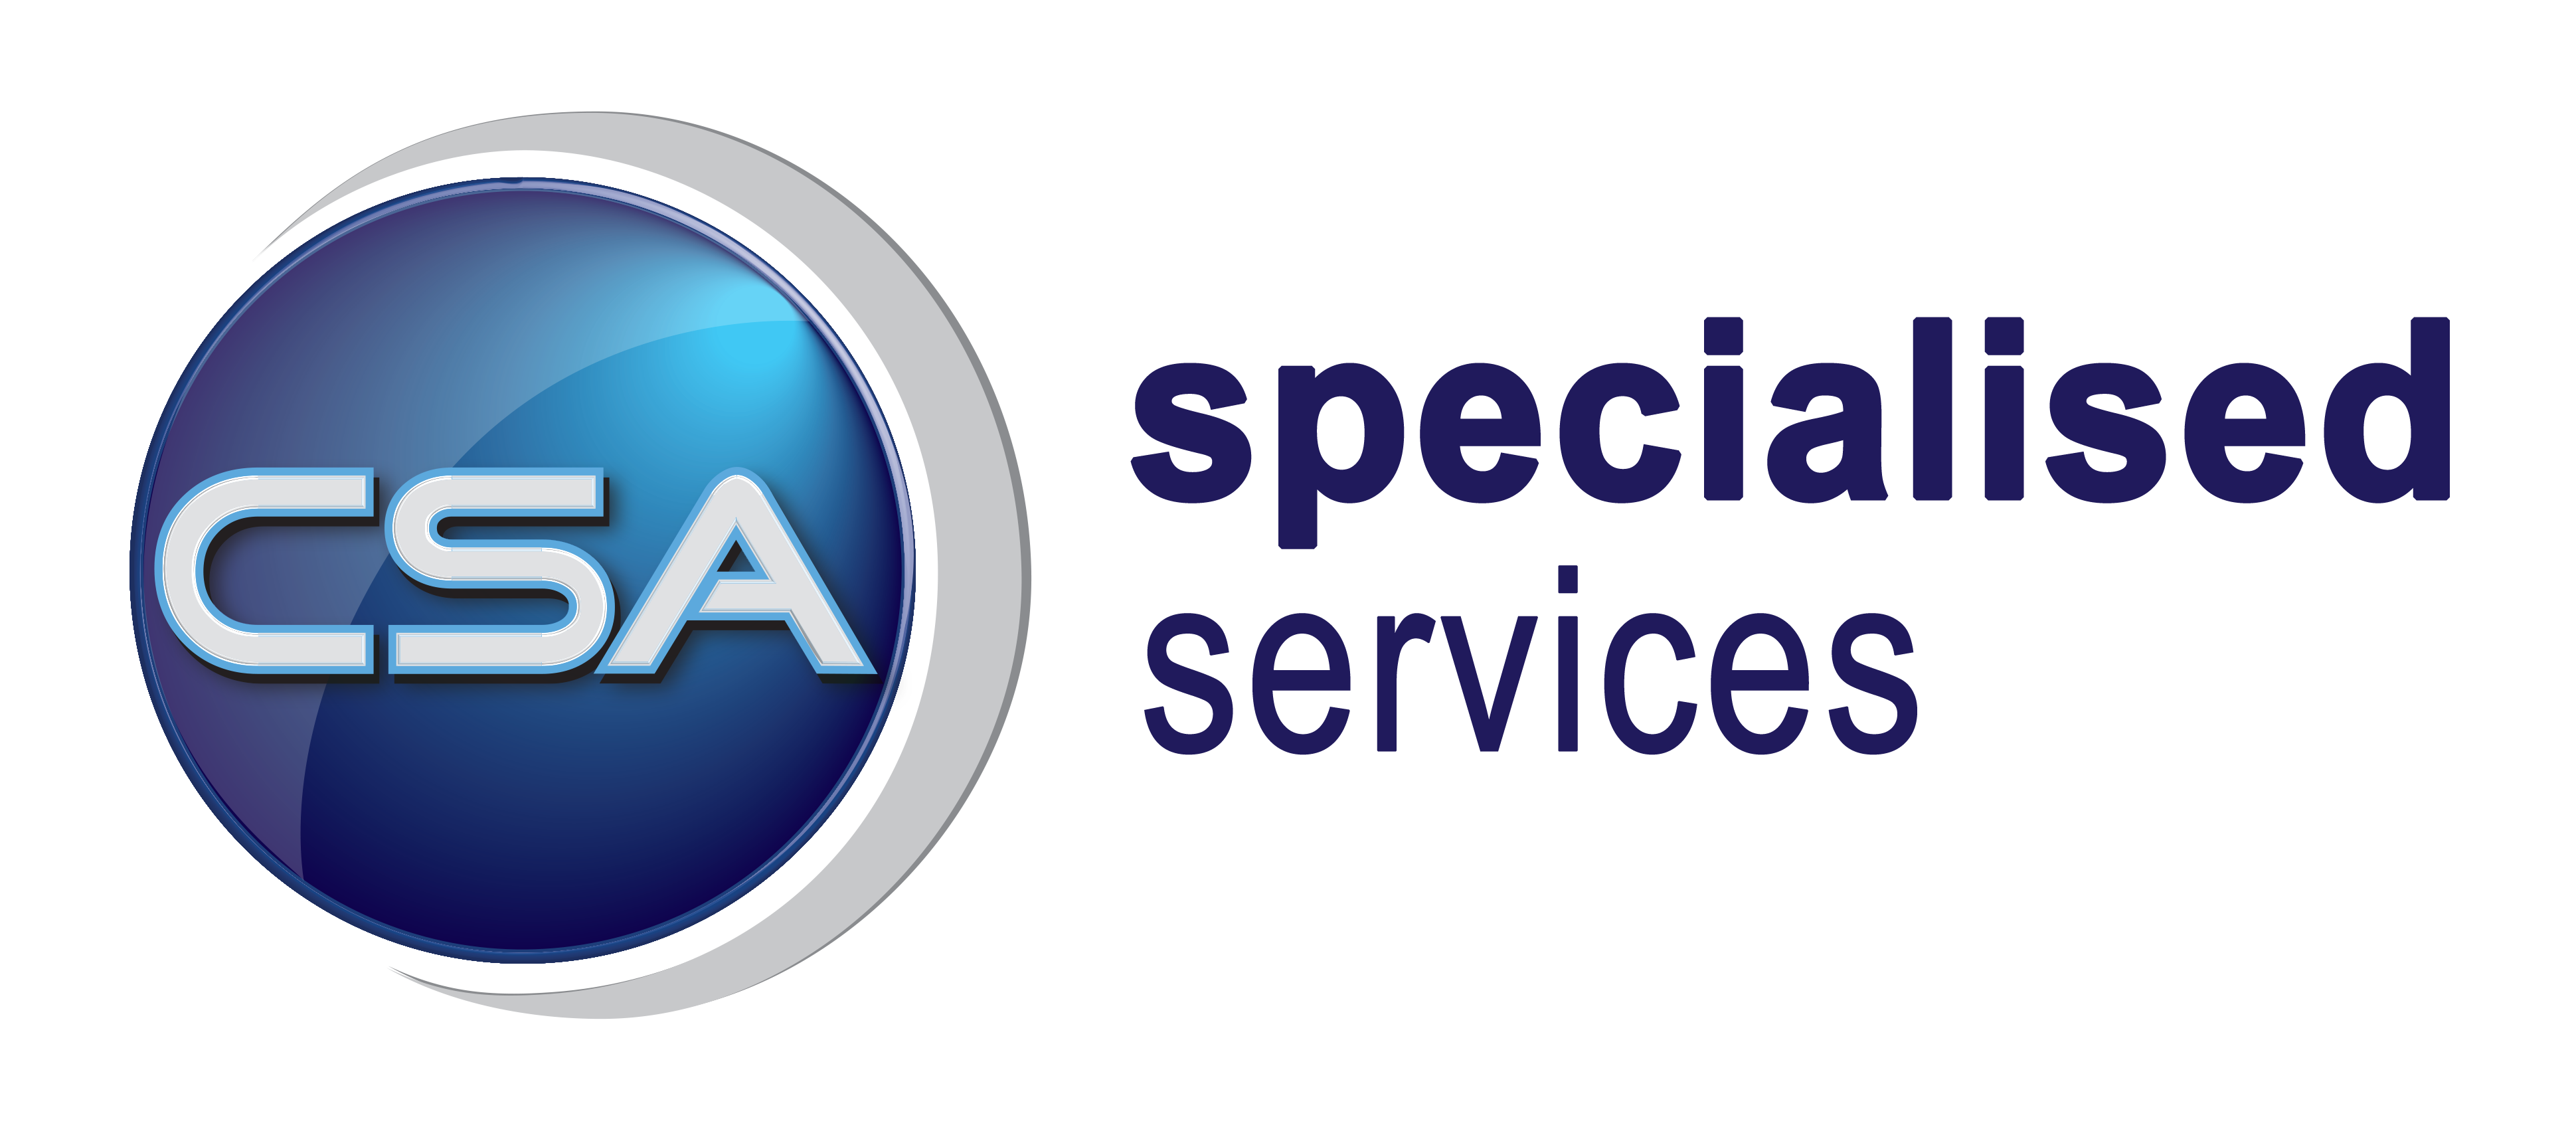 CSA Specialised Services